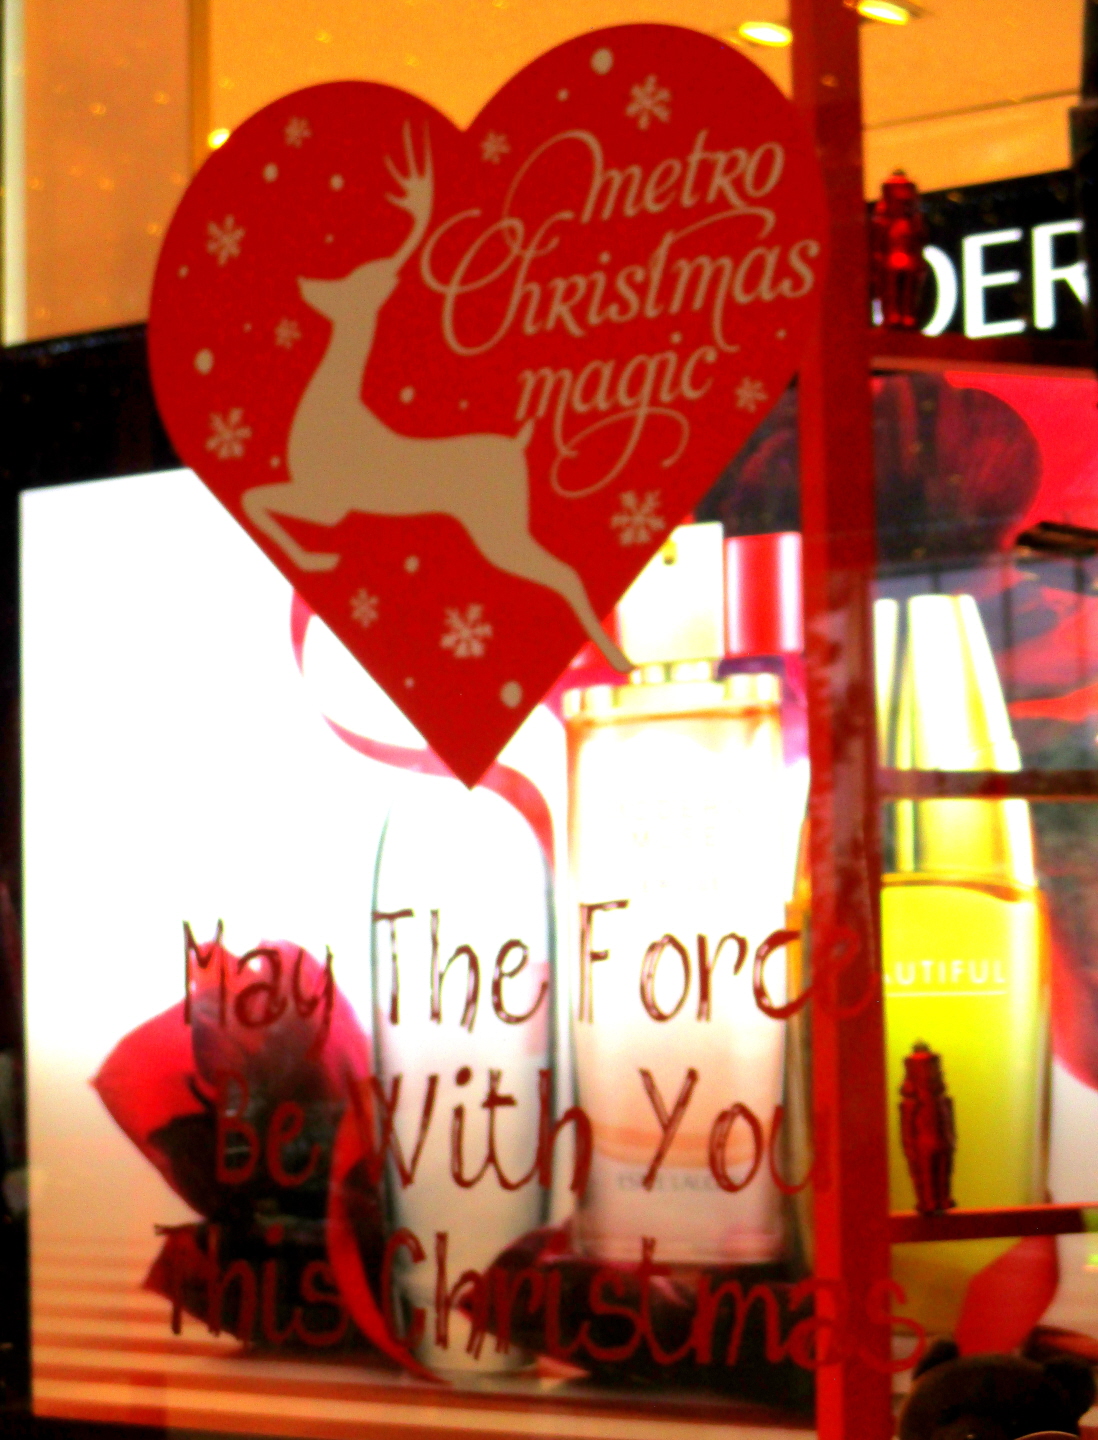 "May The Force Be With You" -Orchard Street Christmas - Singapore